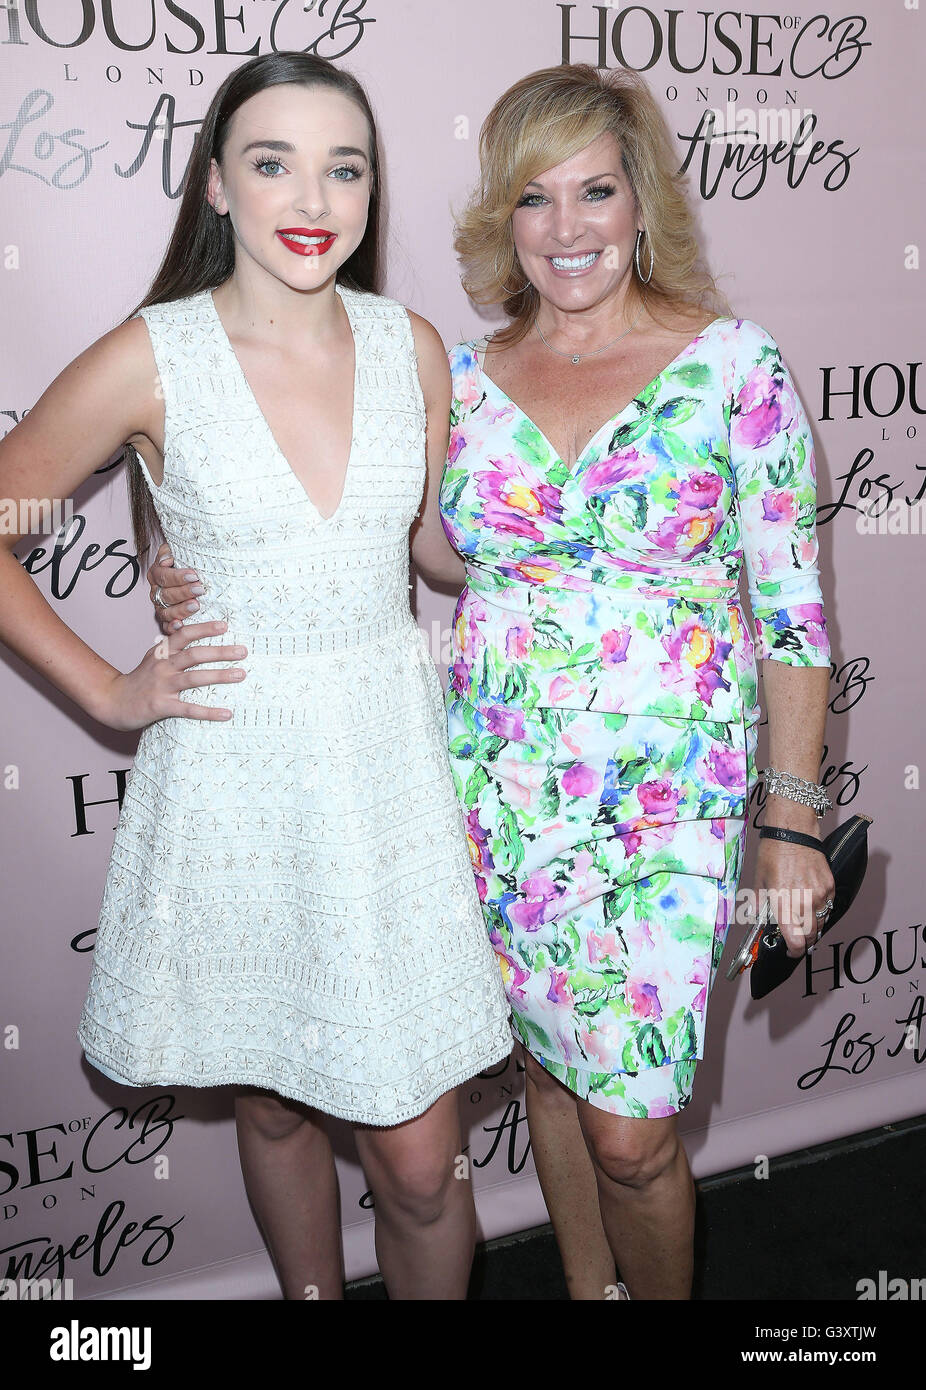 Grand Opening of Abby Lee Miller Dance Company Featuring: Kalani Hilliker  Where: Santa Monica, California, United States When: 30 May 2015 C Stock  Photo - Alamy